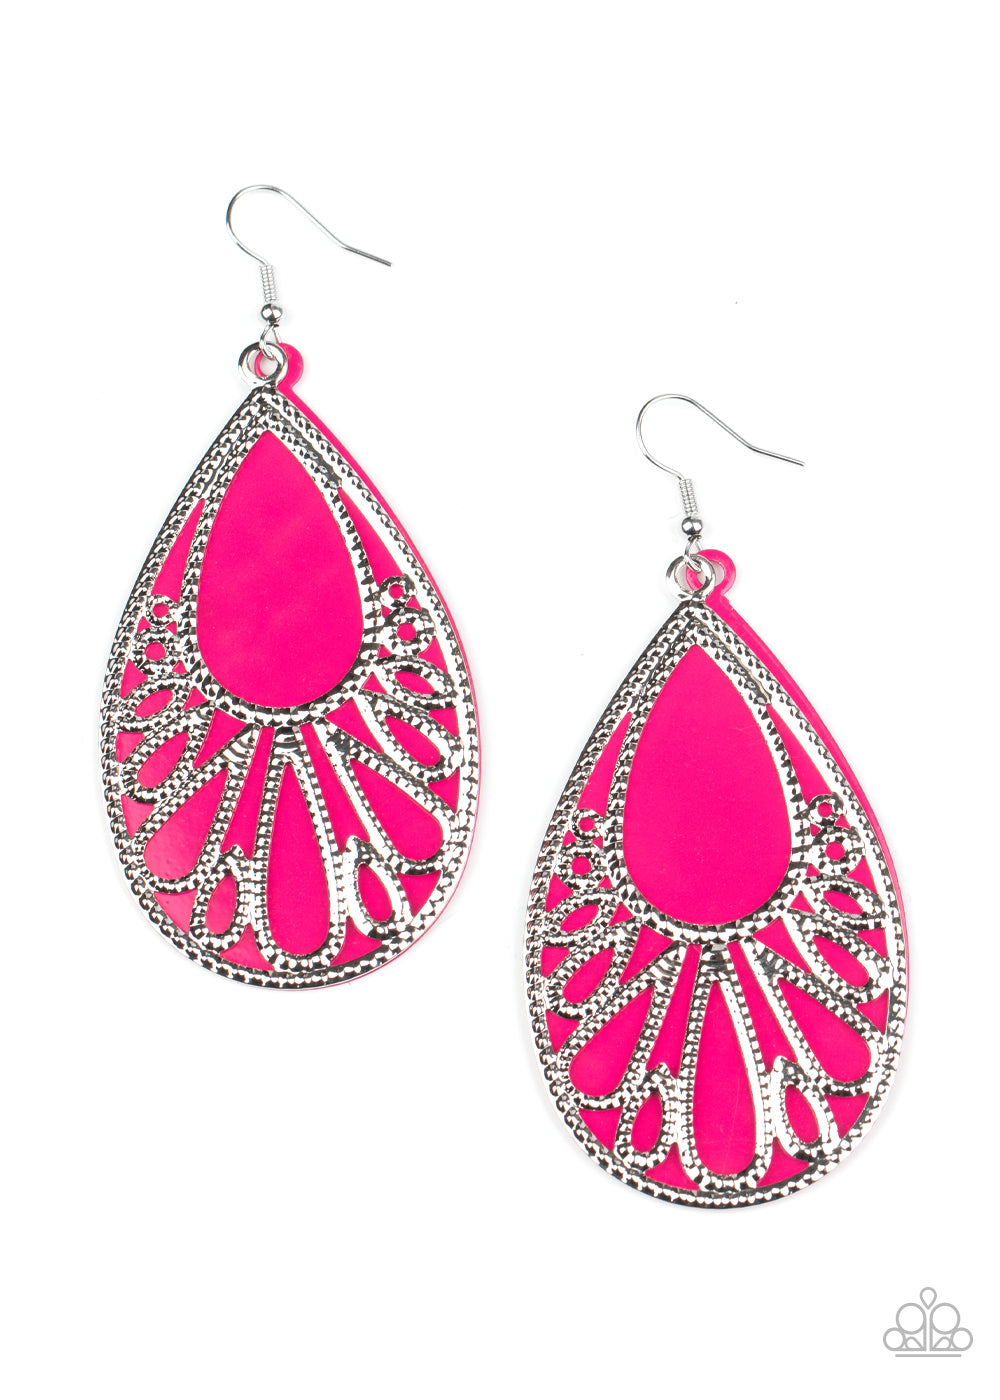 Paparazzi Accessories - Loud and Proud - Pink Earrings